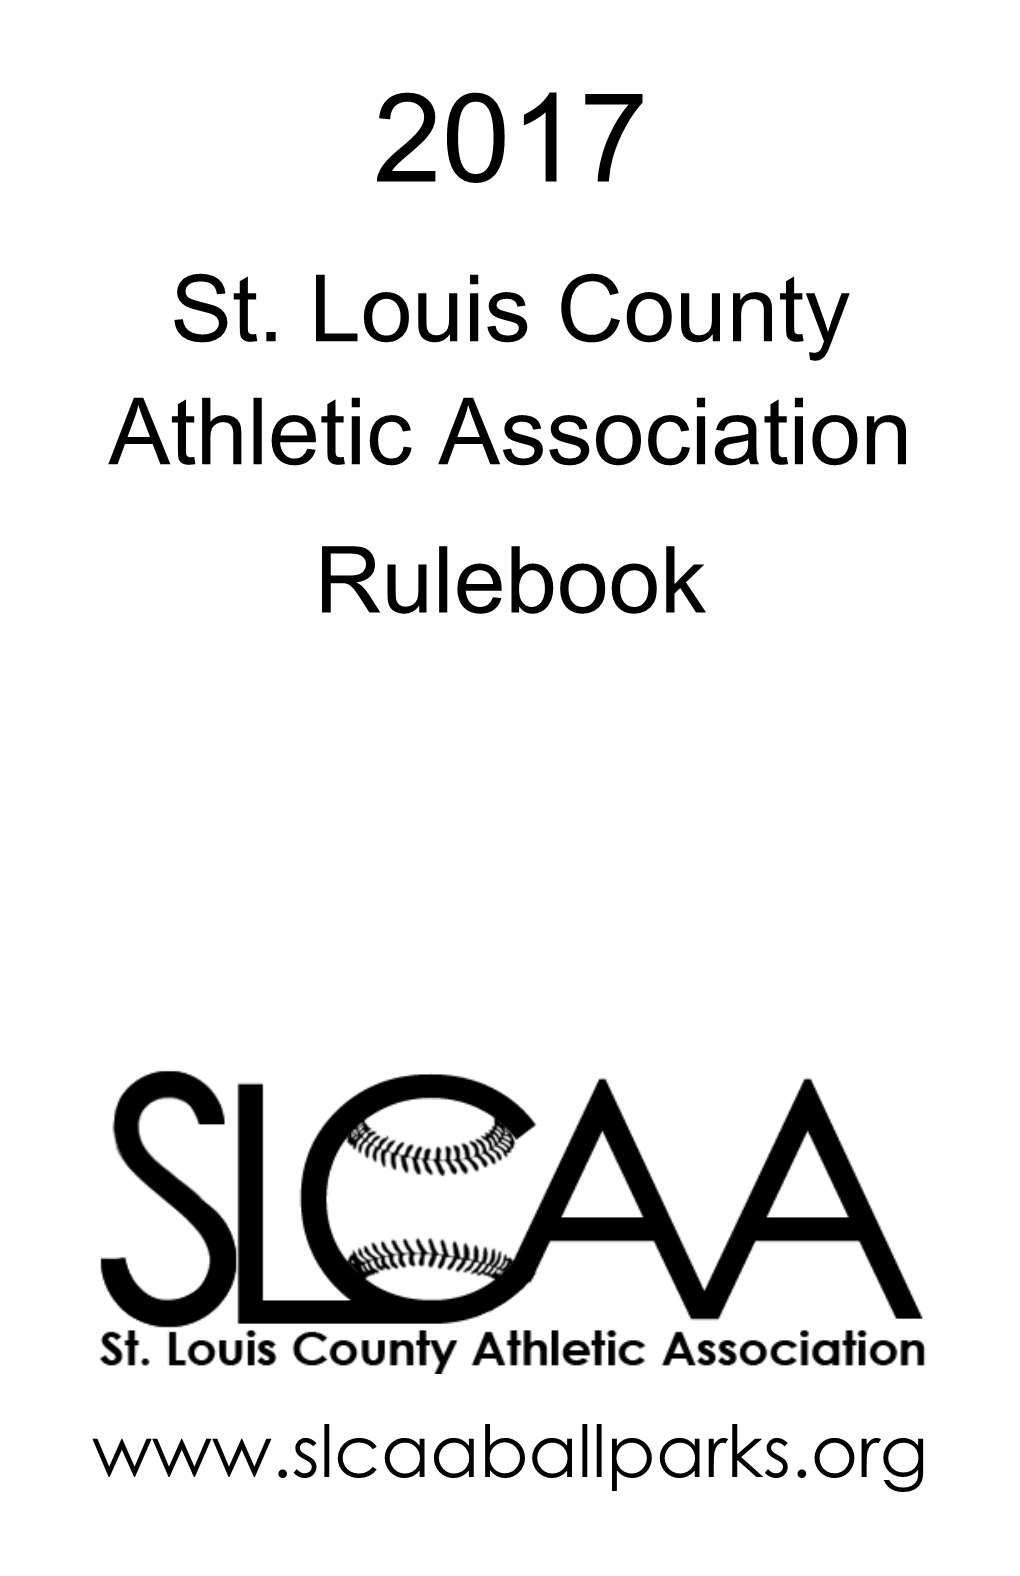 St. Louis County Athletic Association Rulebook